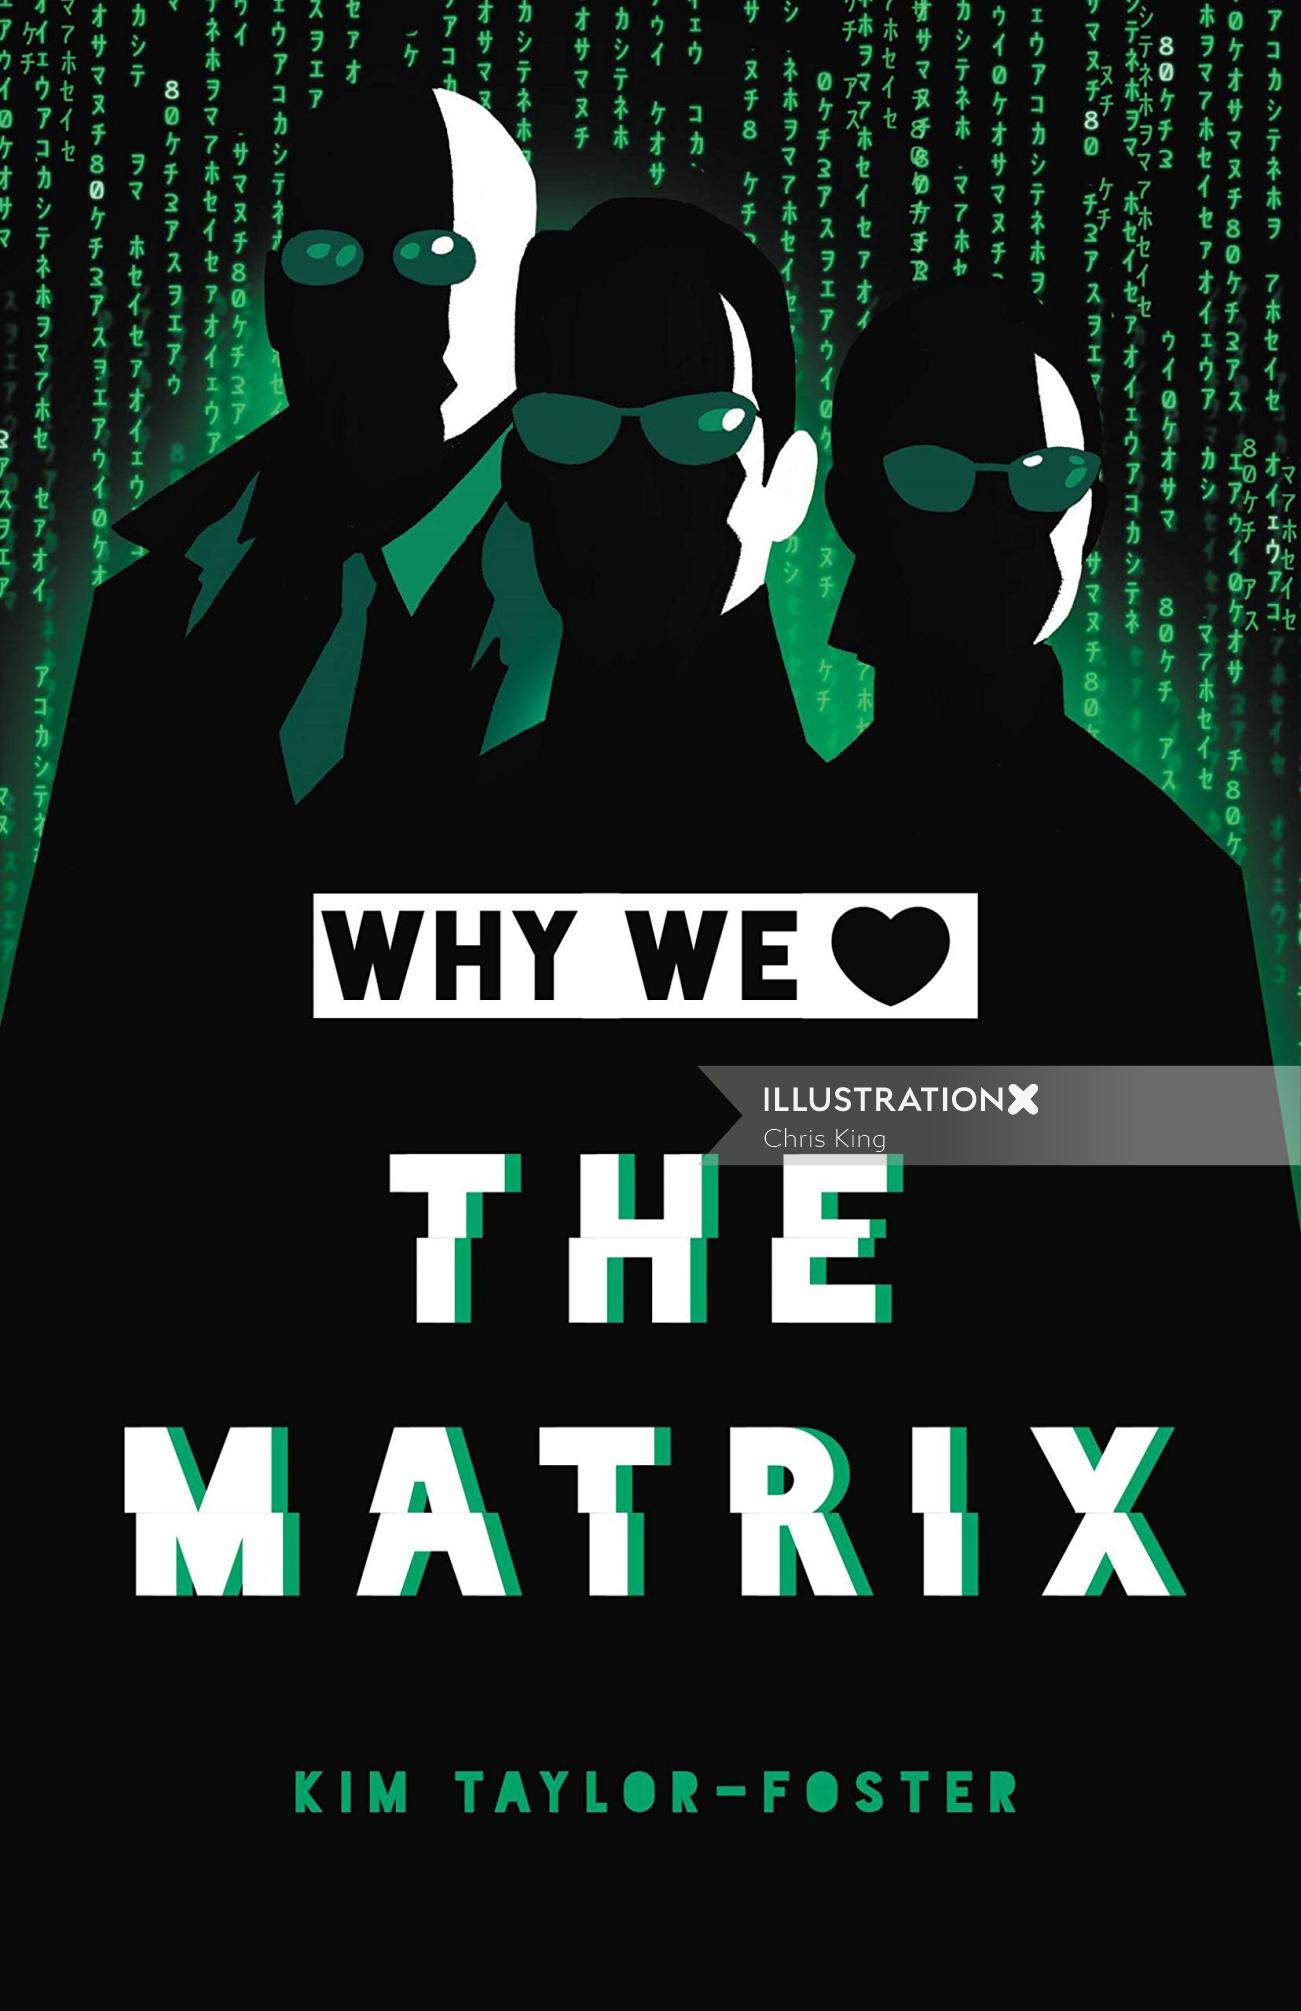 Book cover design of Why We Love the Matrix